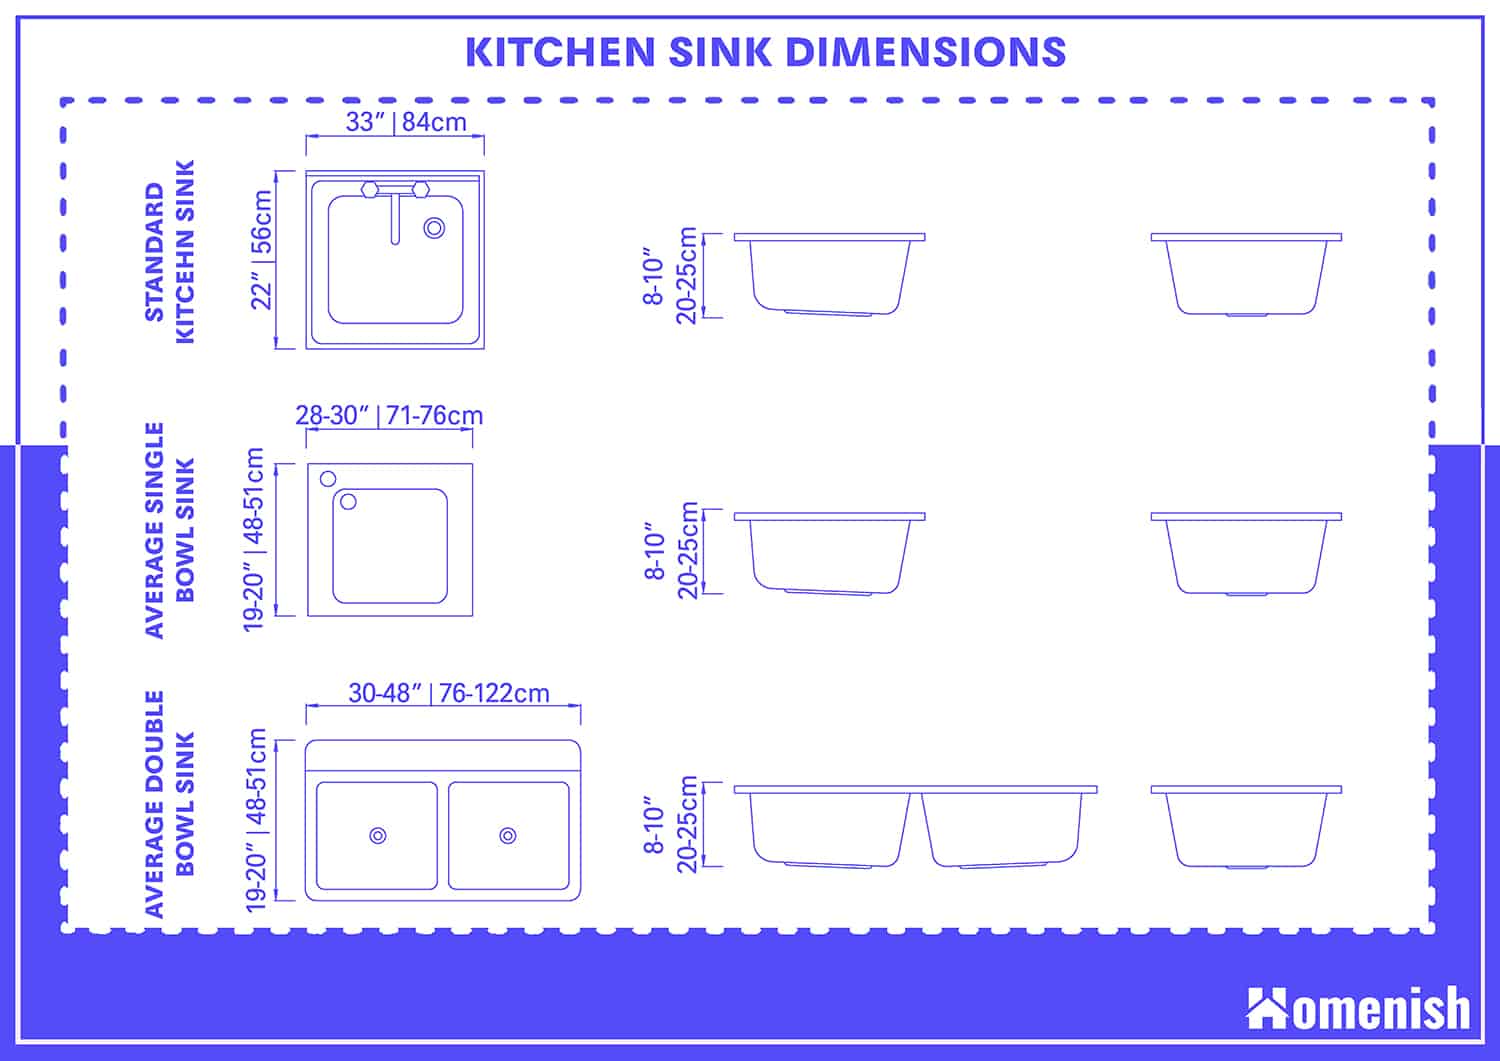 Kitchen Sink Dimensions and Guidelines with Drawing   Homenish